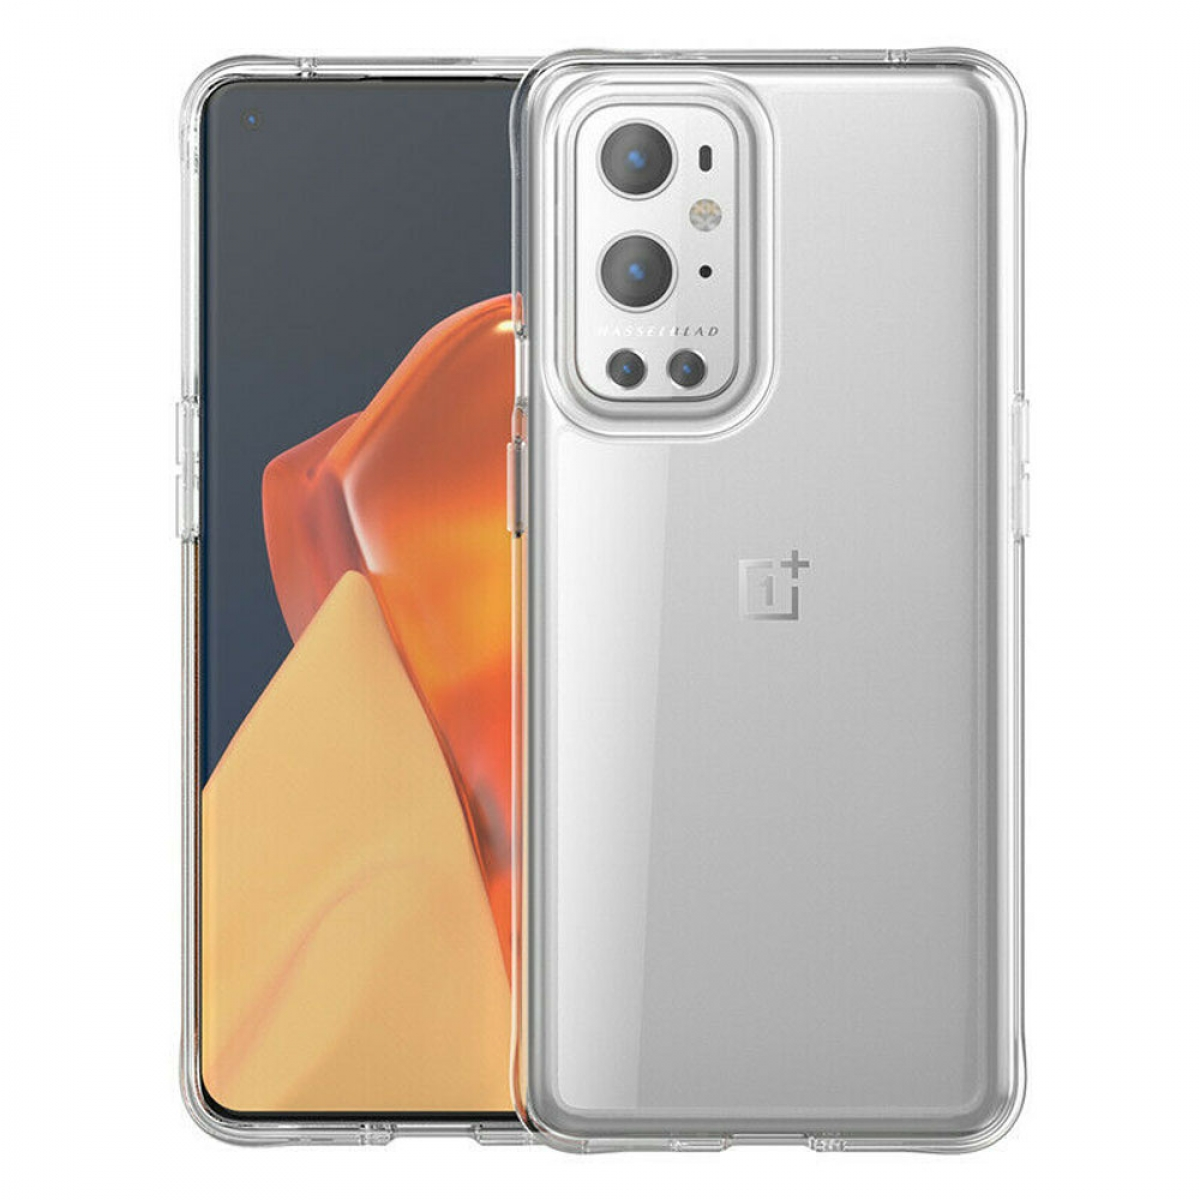 Backcover, CASEONLINE OnePlus, Pro, Transparent CA4, 9